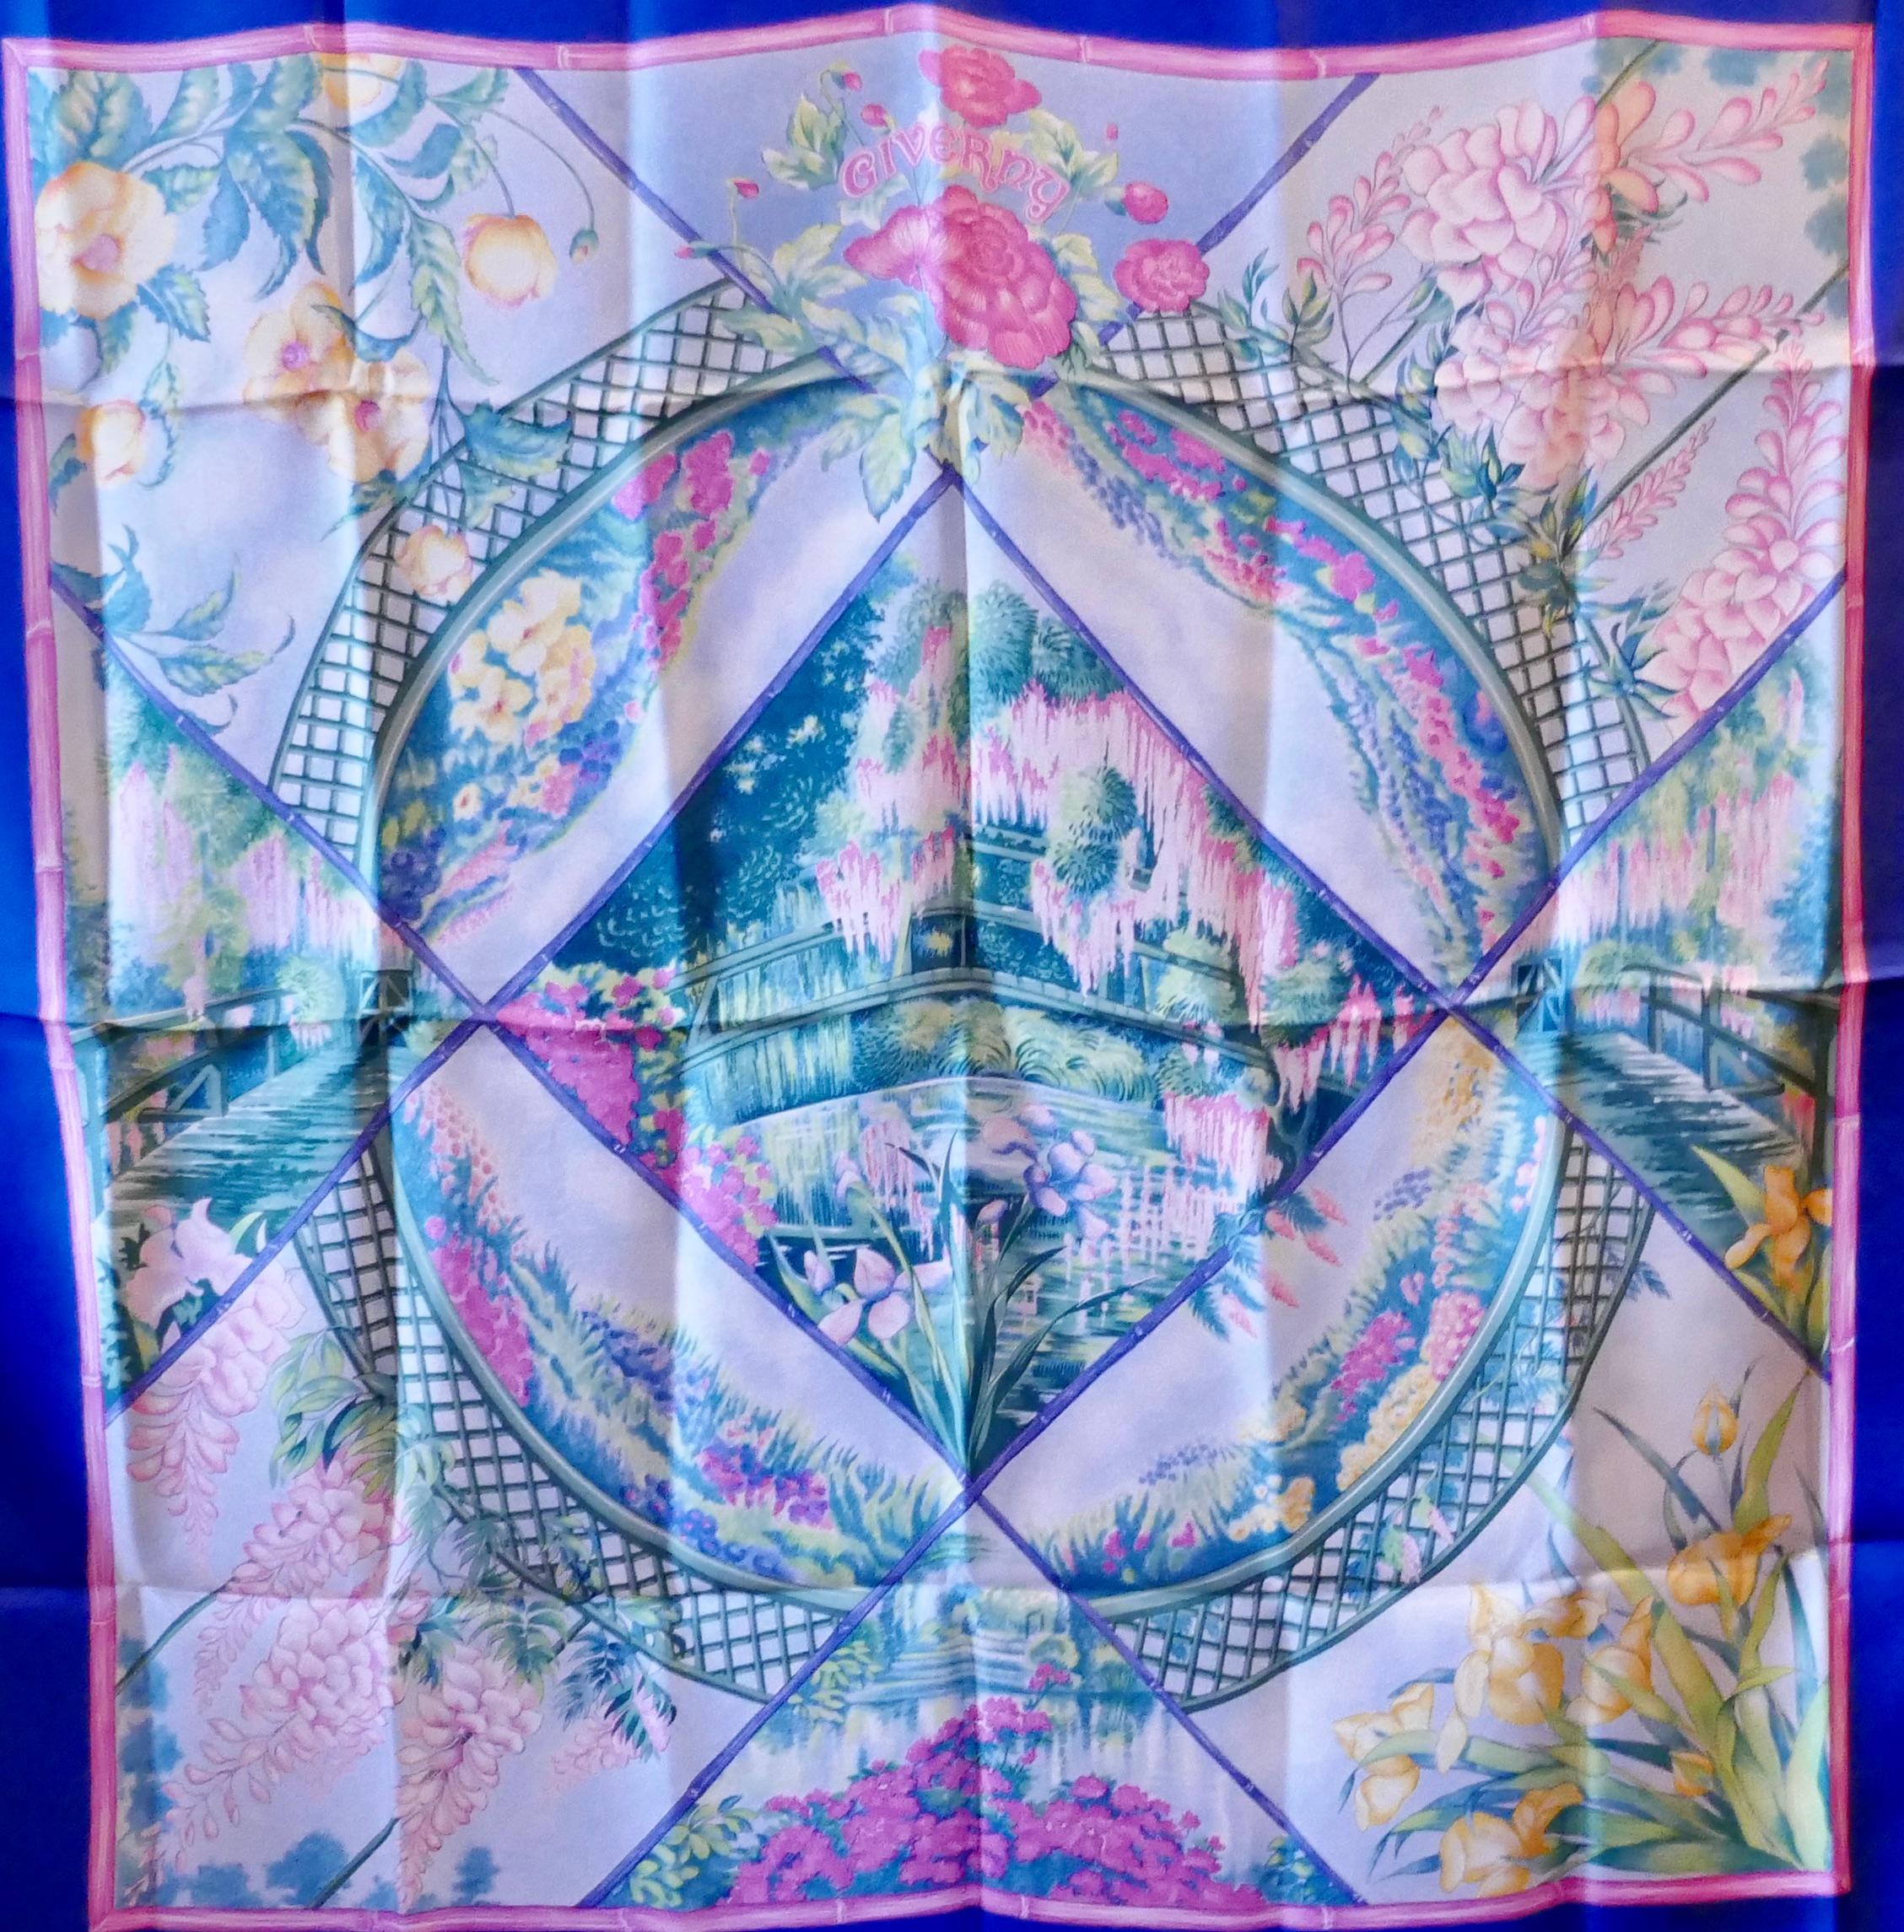 Gray Original Rare 1989 Hermes Silk Scarf “ Giverny” by  Laurence Bourthoumieux For Sale